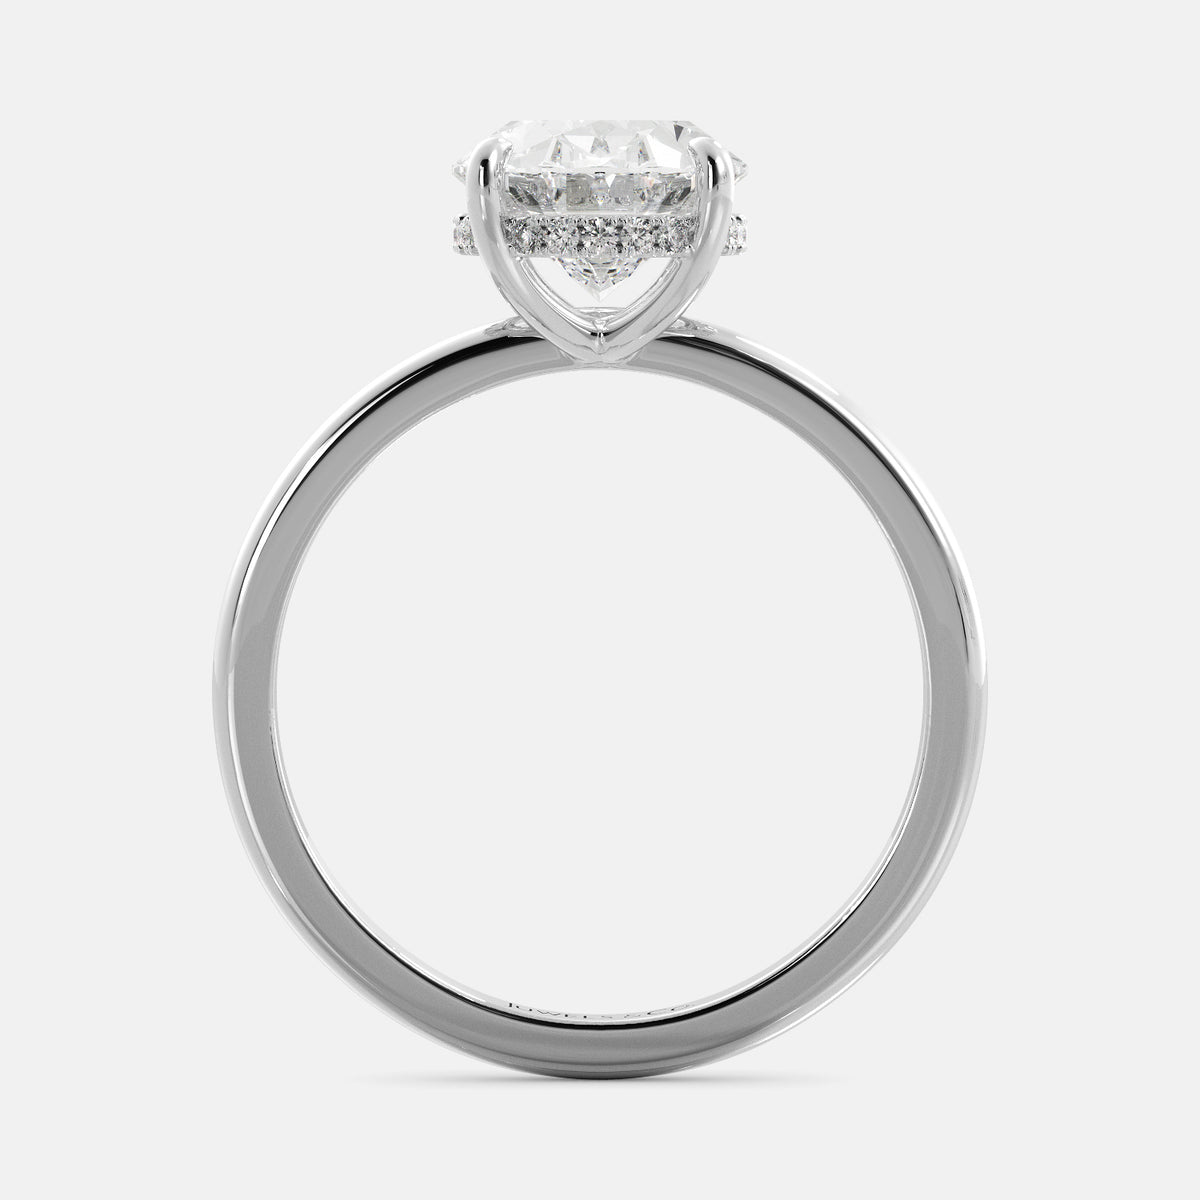 Oval Diamond Engagement Ring with Hidden Halo